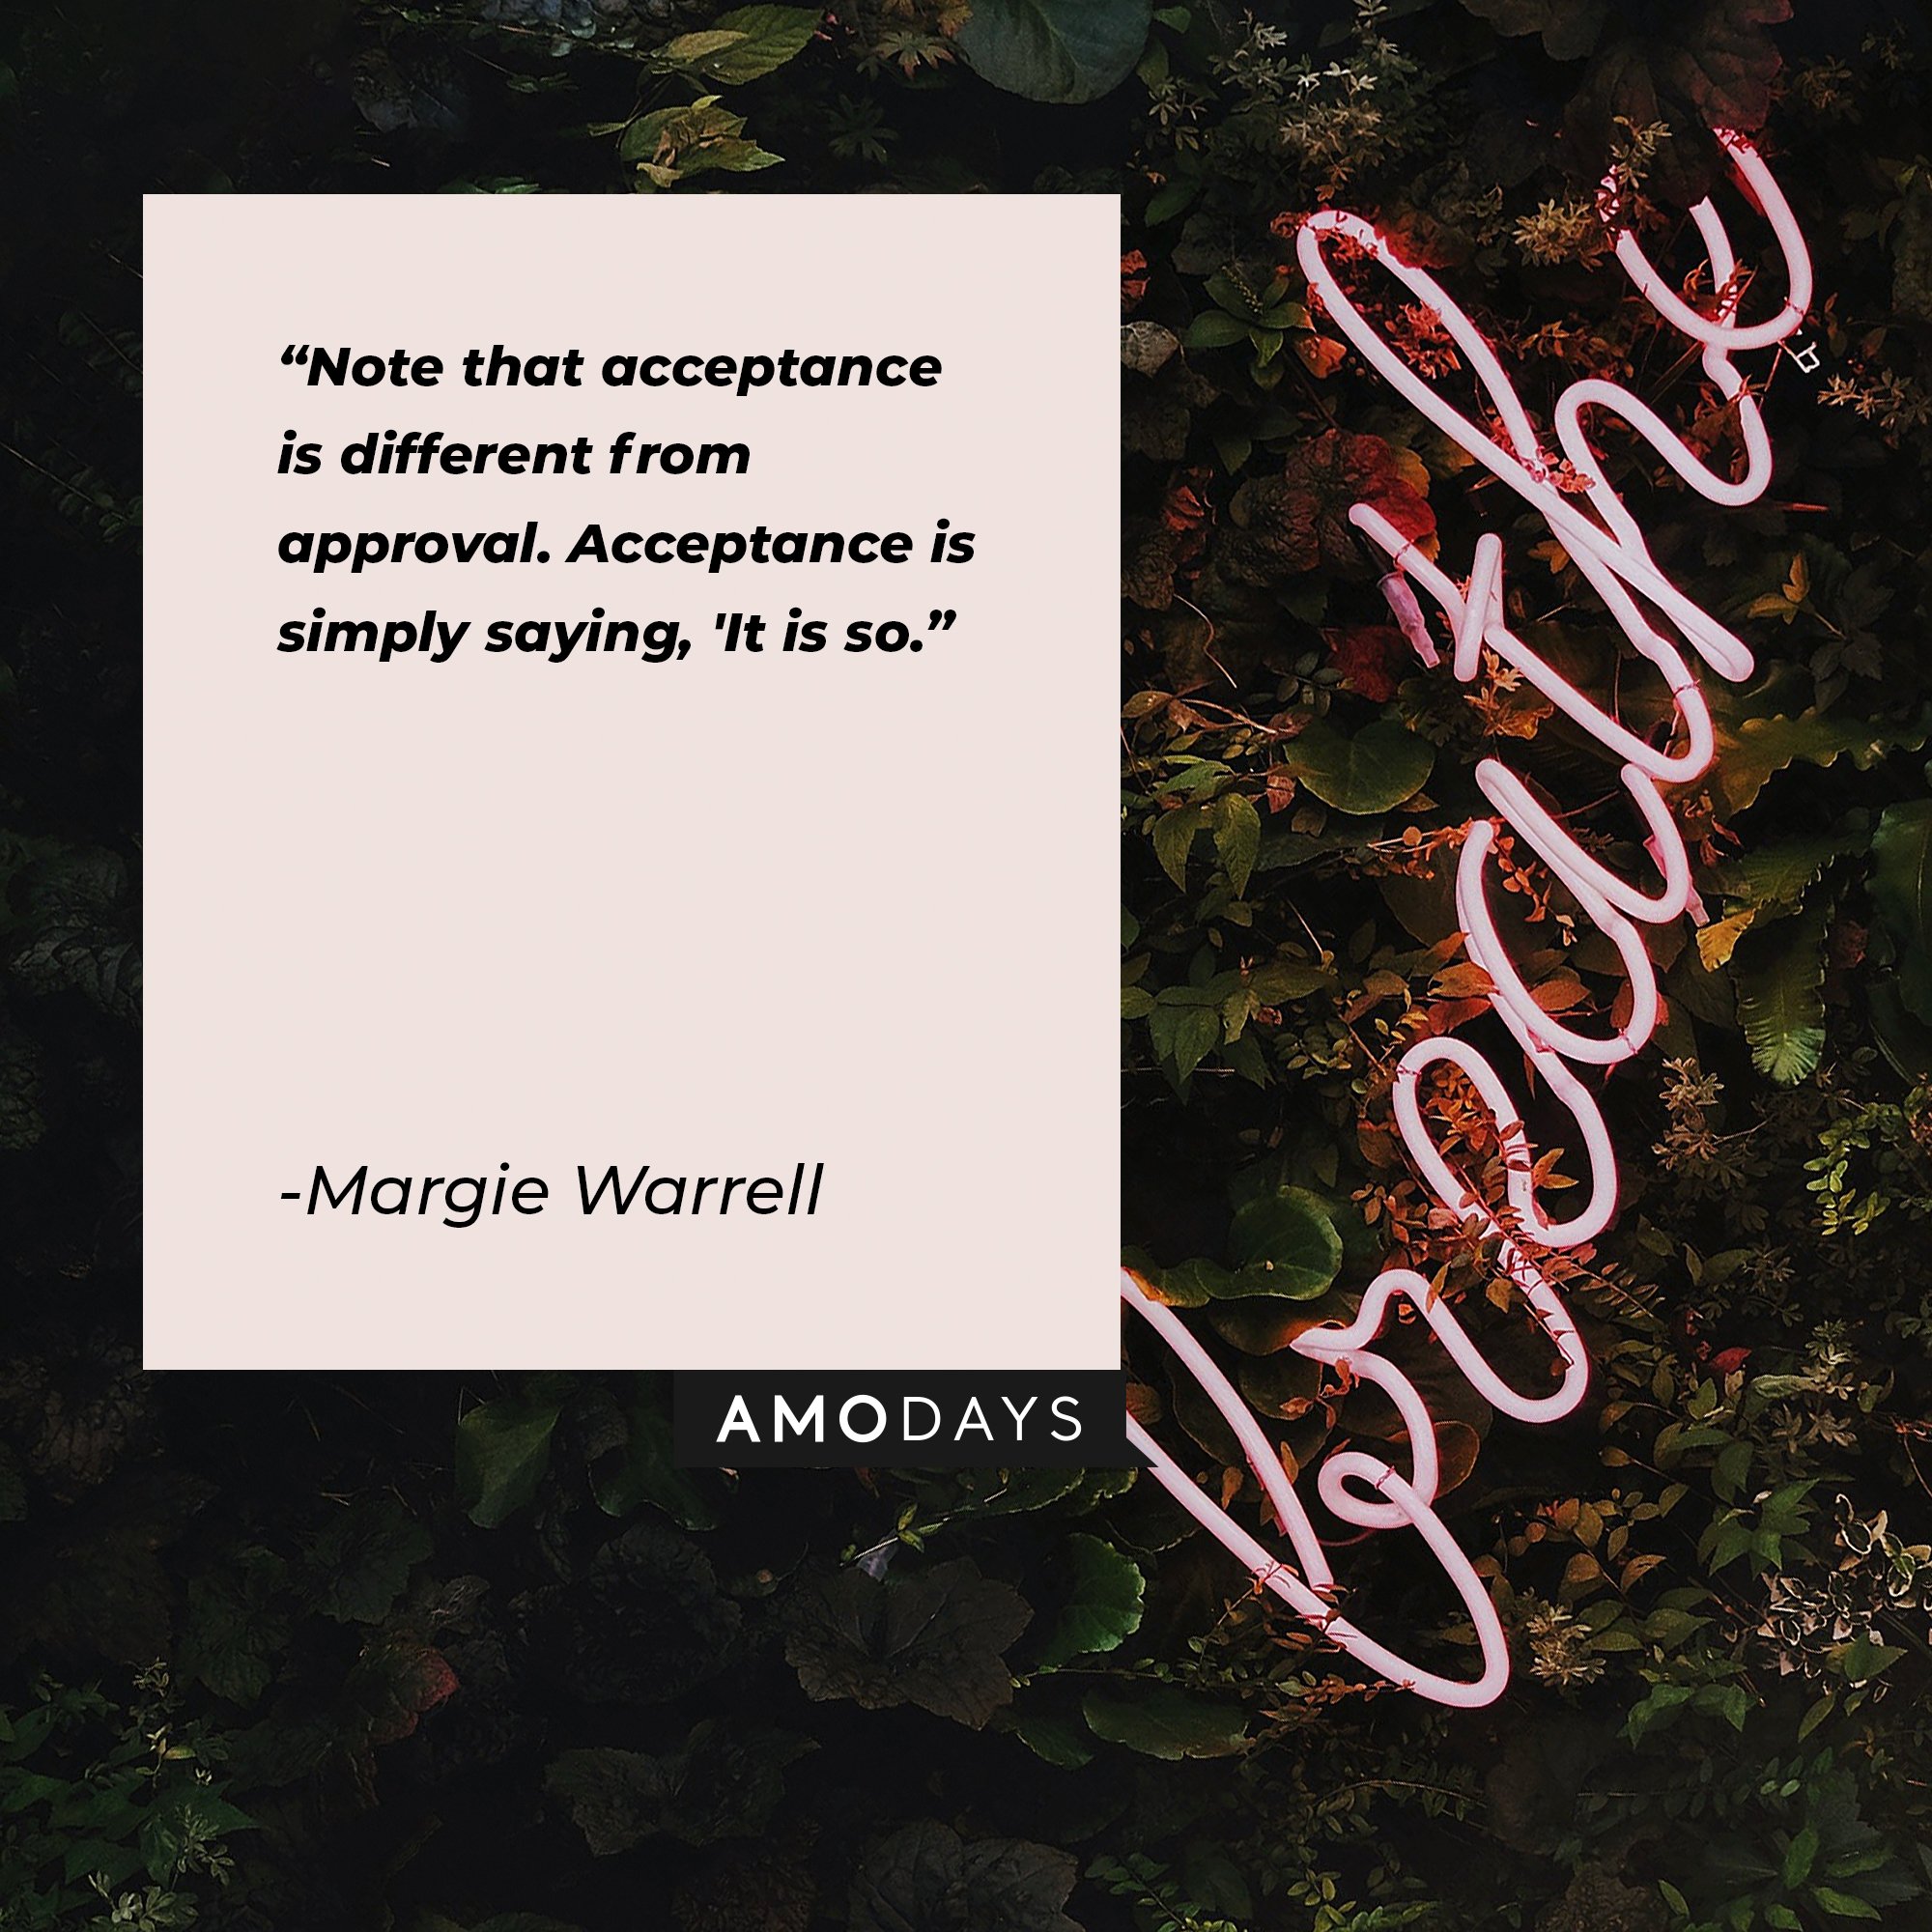 Margie Warrell’s quote: "Note that acceptance is different from approval. Acceptance is simply saying, 'It is so.'" | Image: AmoDays  